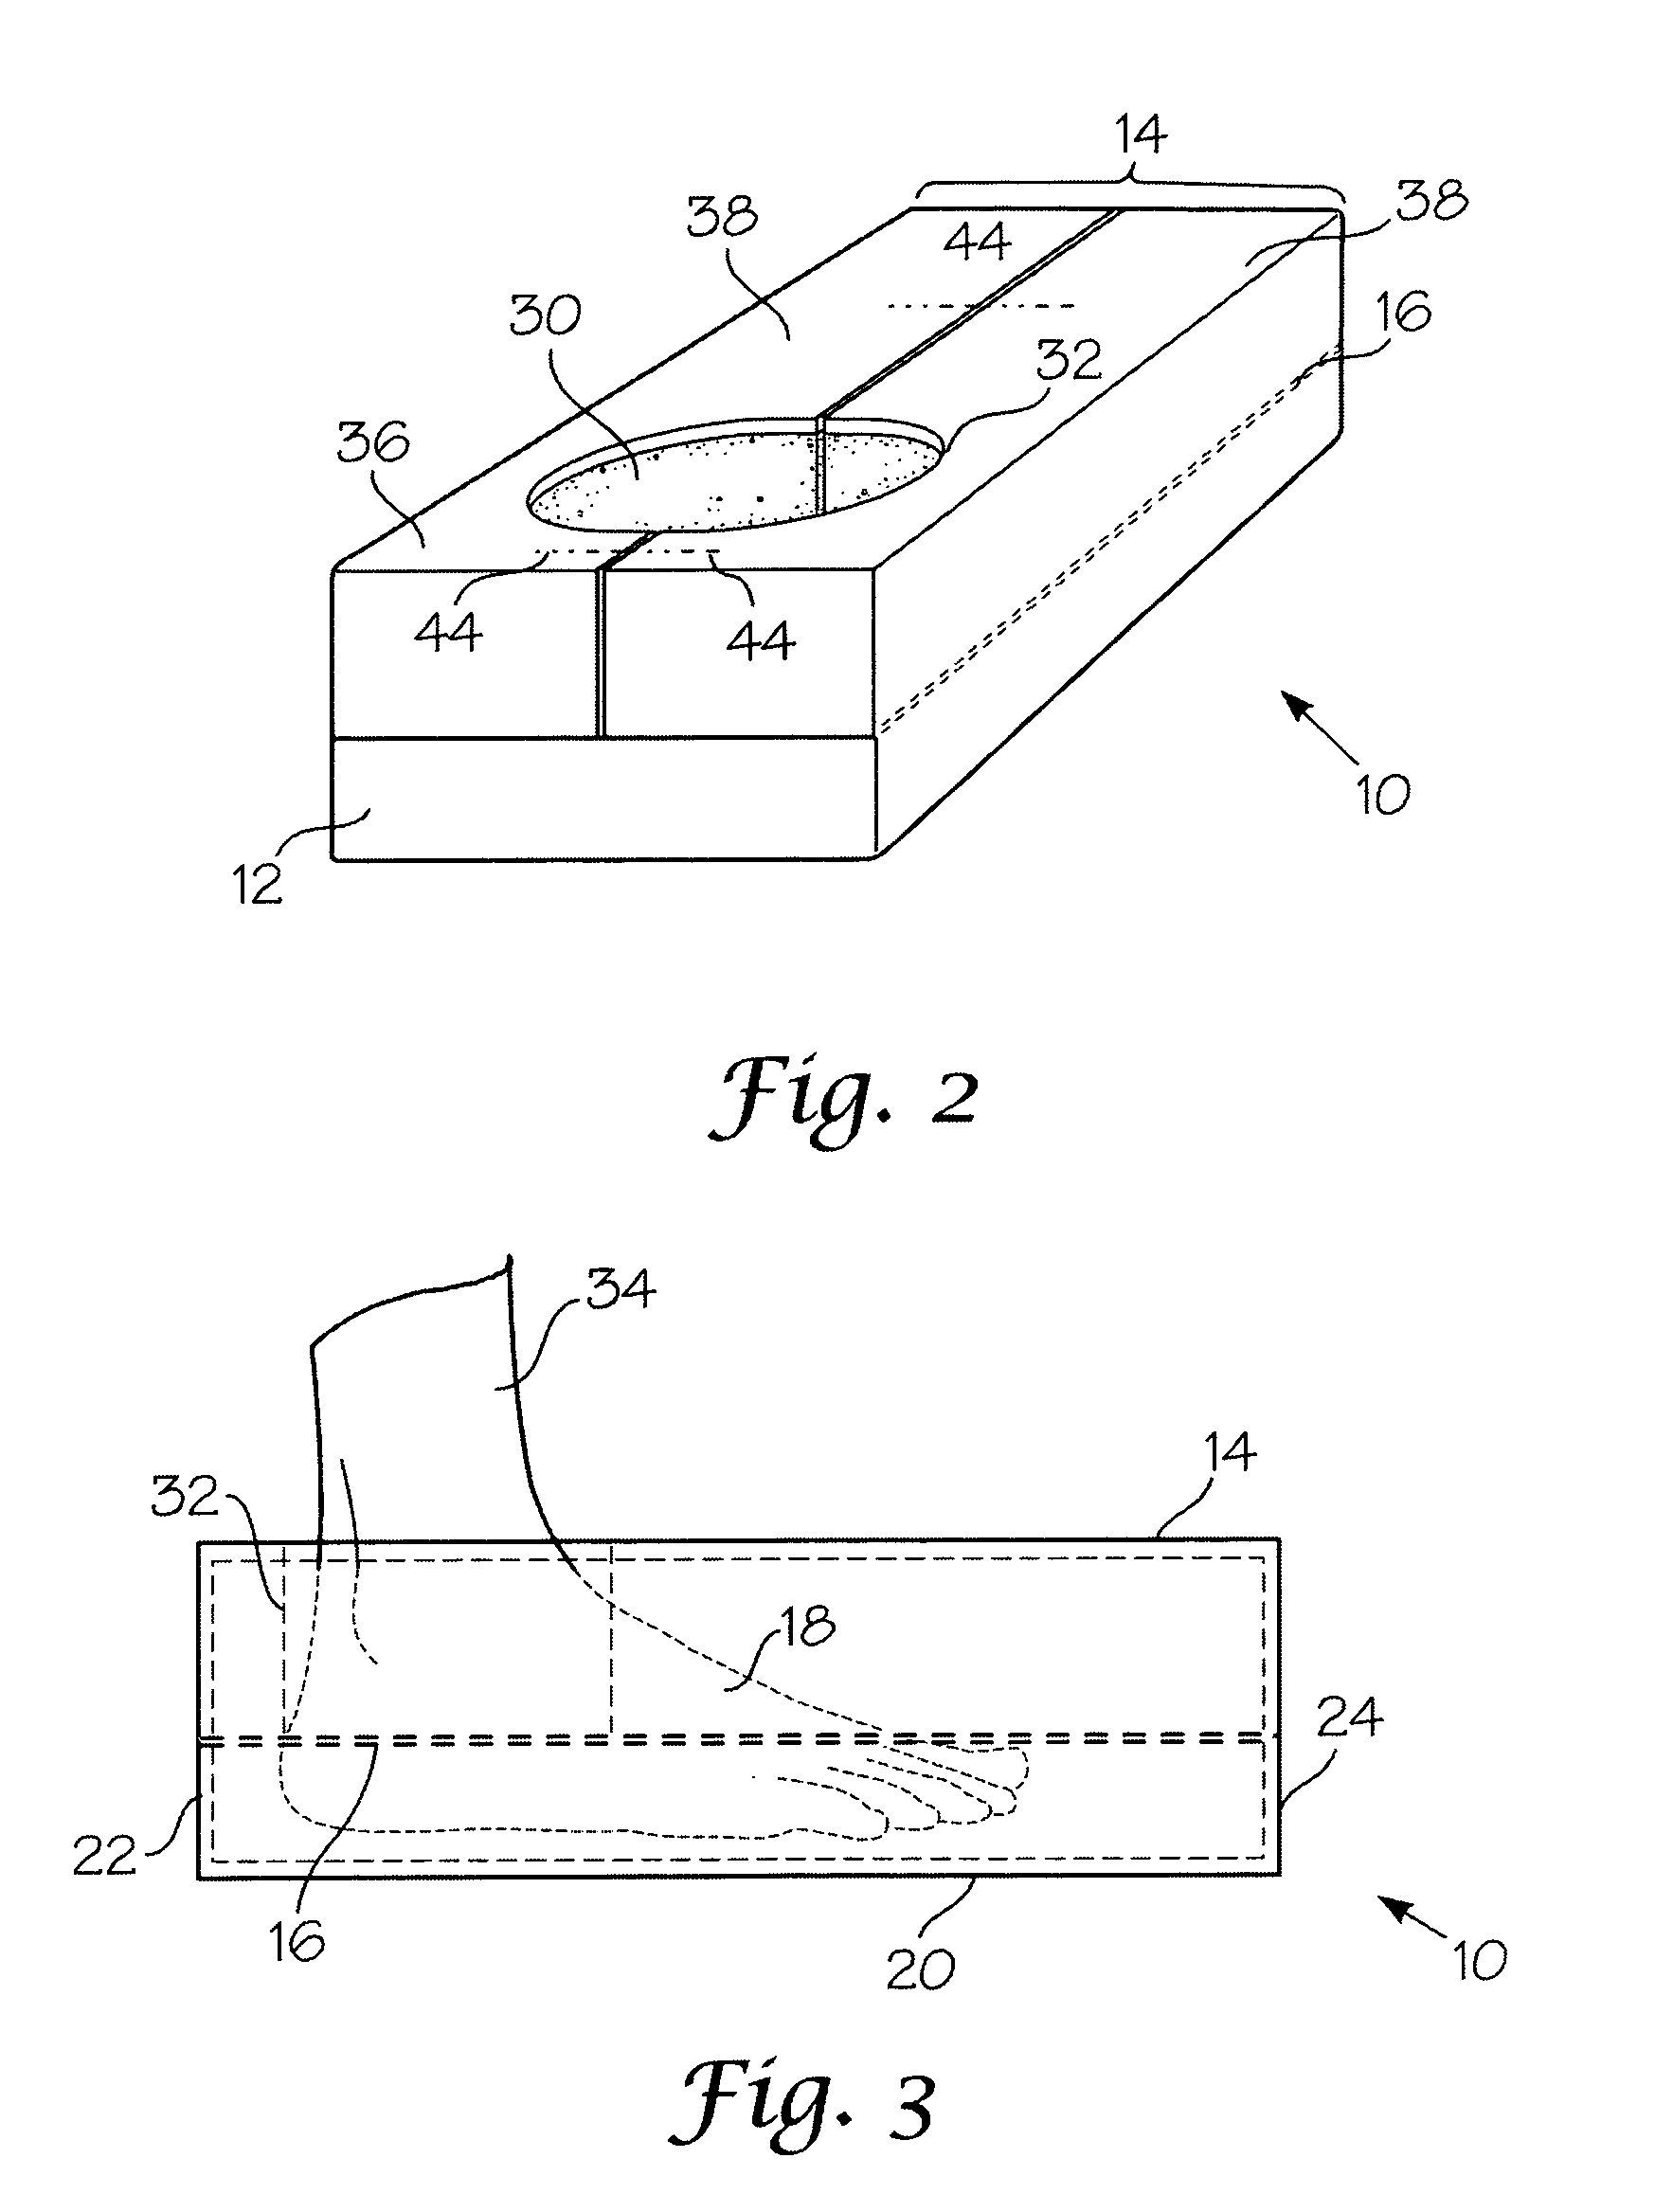 Apparatus and method for fitting shoes